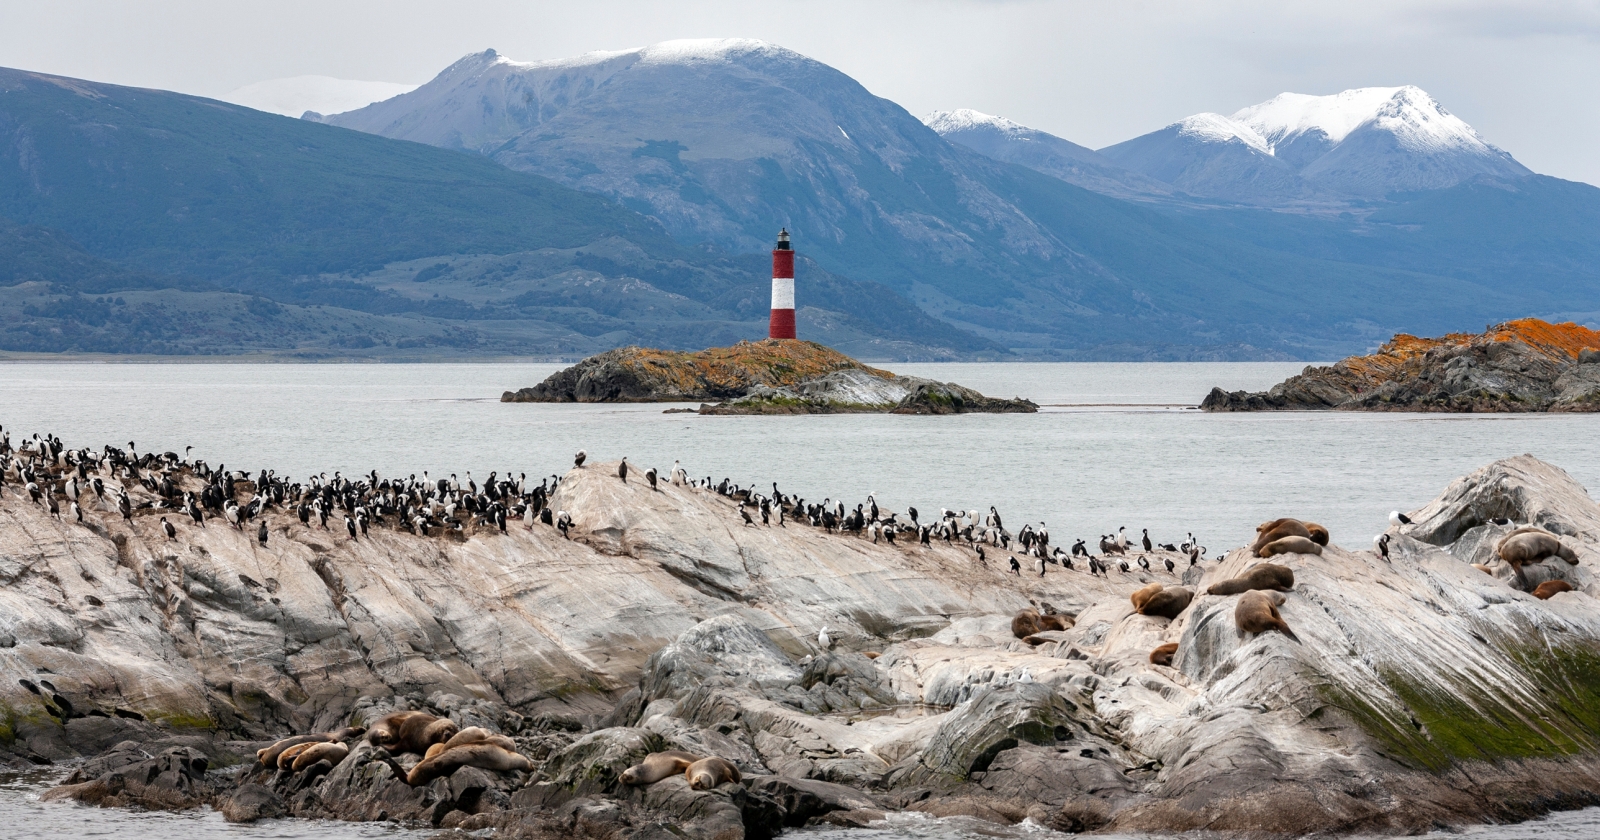 Wildlife on a small island in the Beagle channel